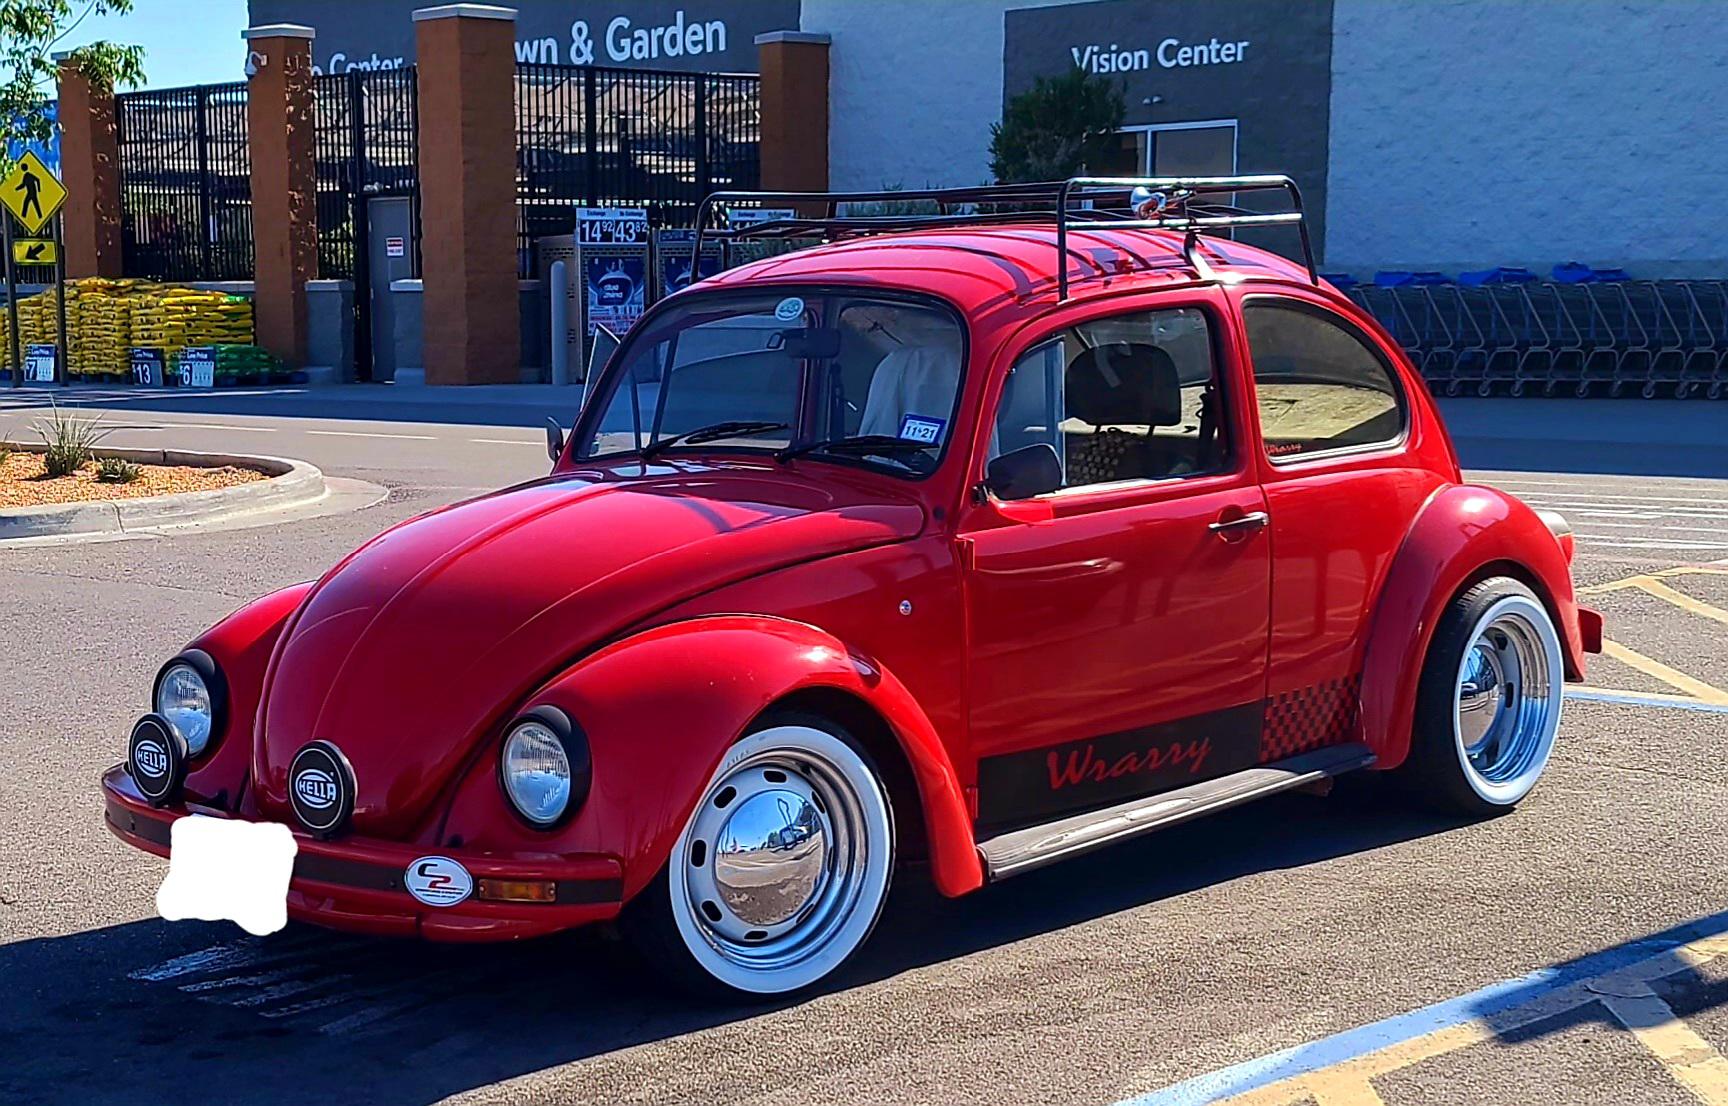 volkswagen beetle - wn & Garden Vision Center Baba. 1492438 Tit 1121 frown Mella Wall Ni Wrarry 3